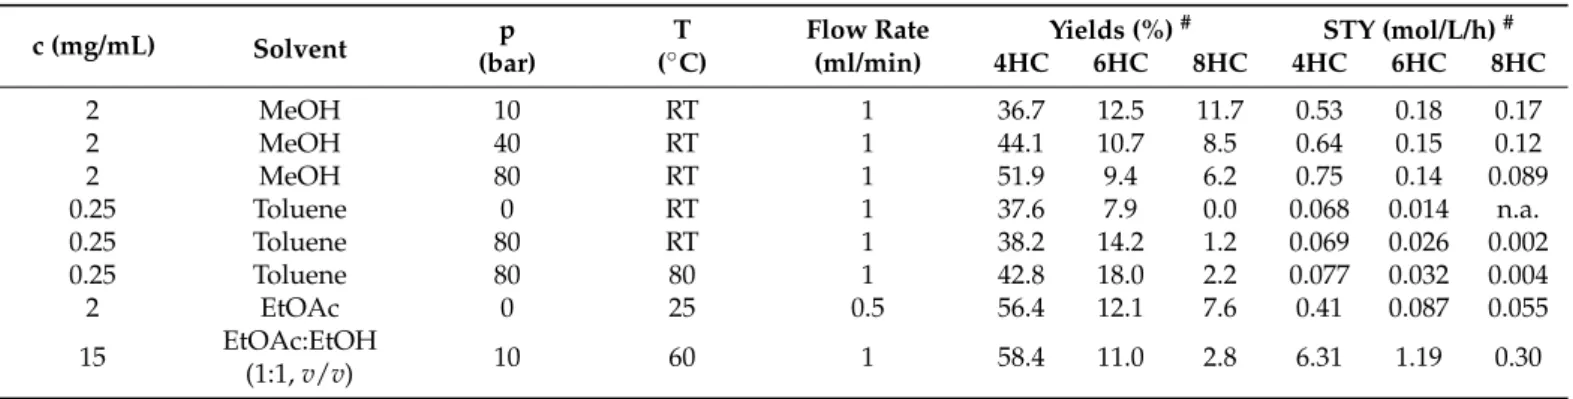 Table 1. Reaction conditions of the continuous flow hydrogenation of curcumin, and yields achieved for tetra-, hexa-, and octahydrocurcumin (DMC, 4HC, 6HC and 8HC respectively)